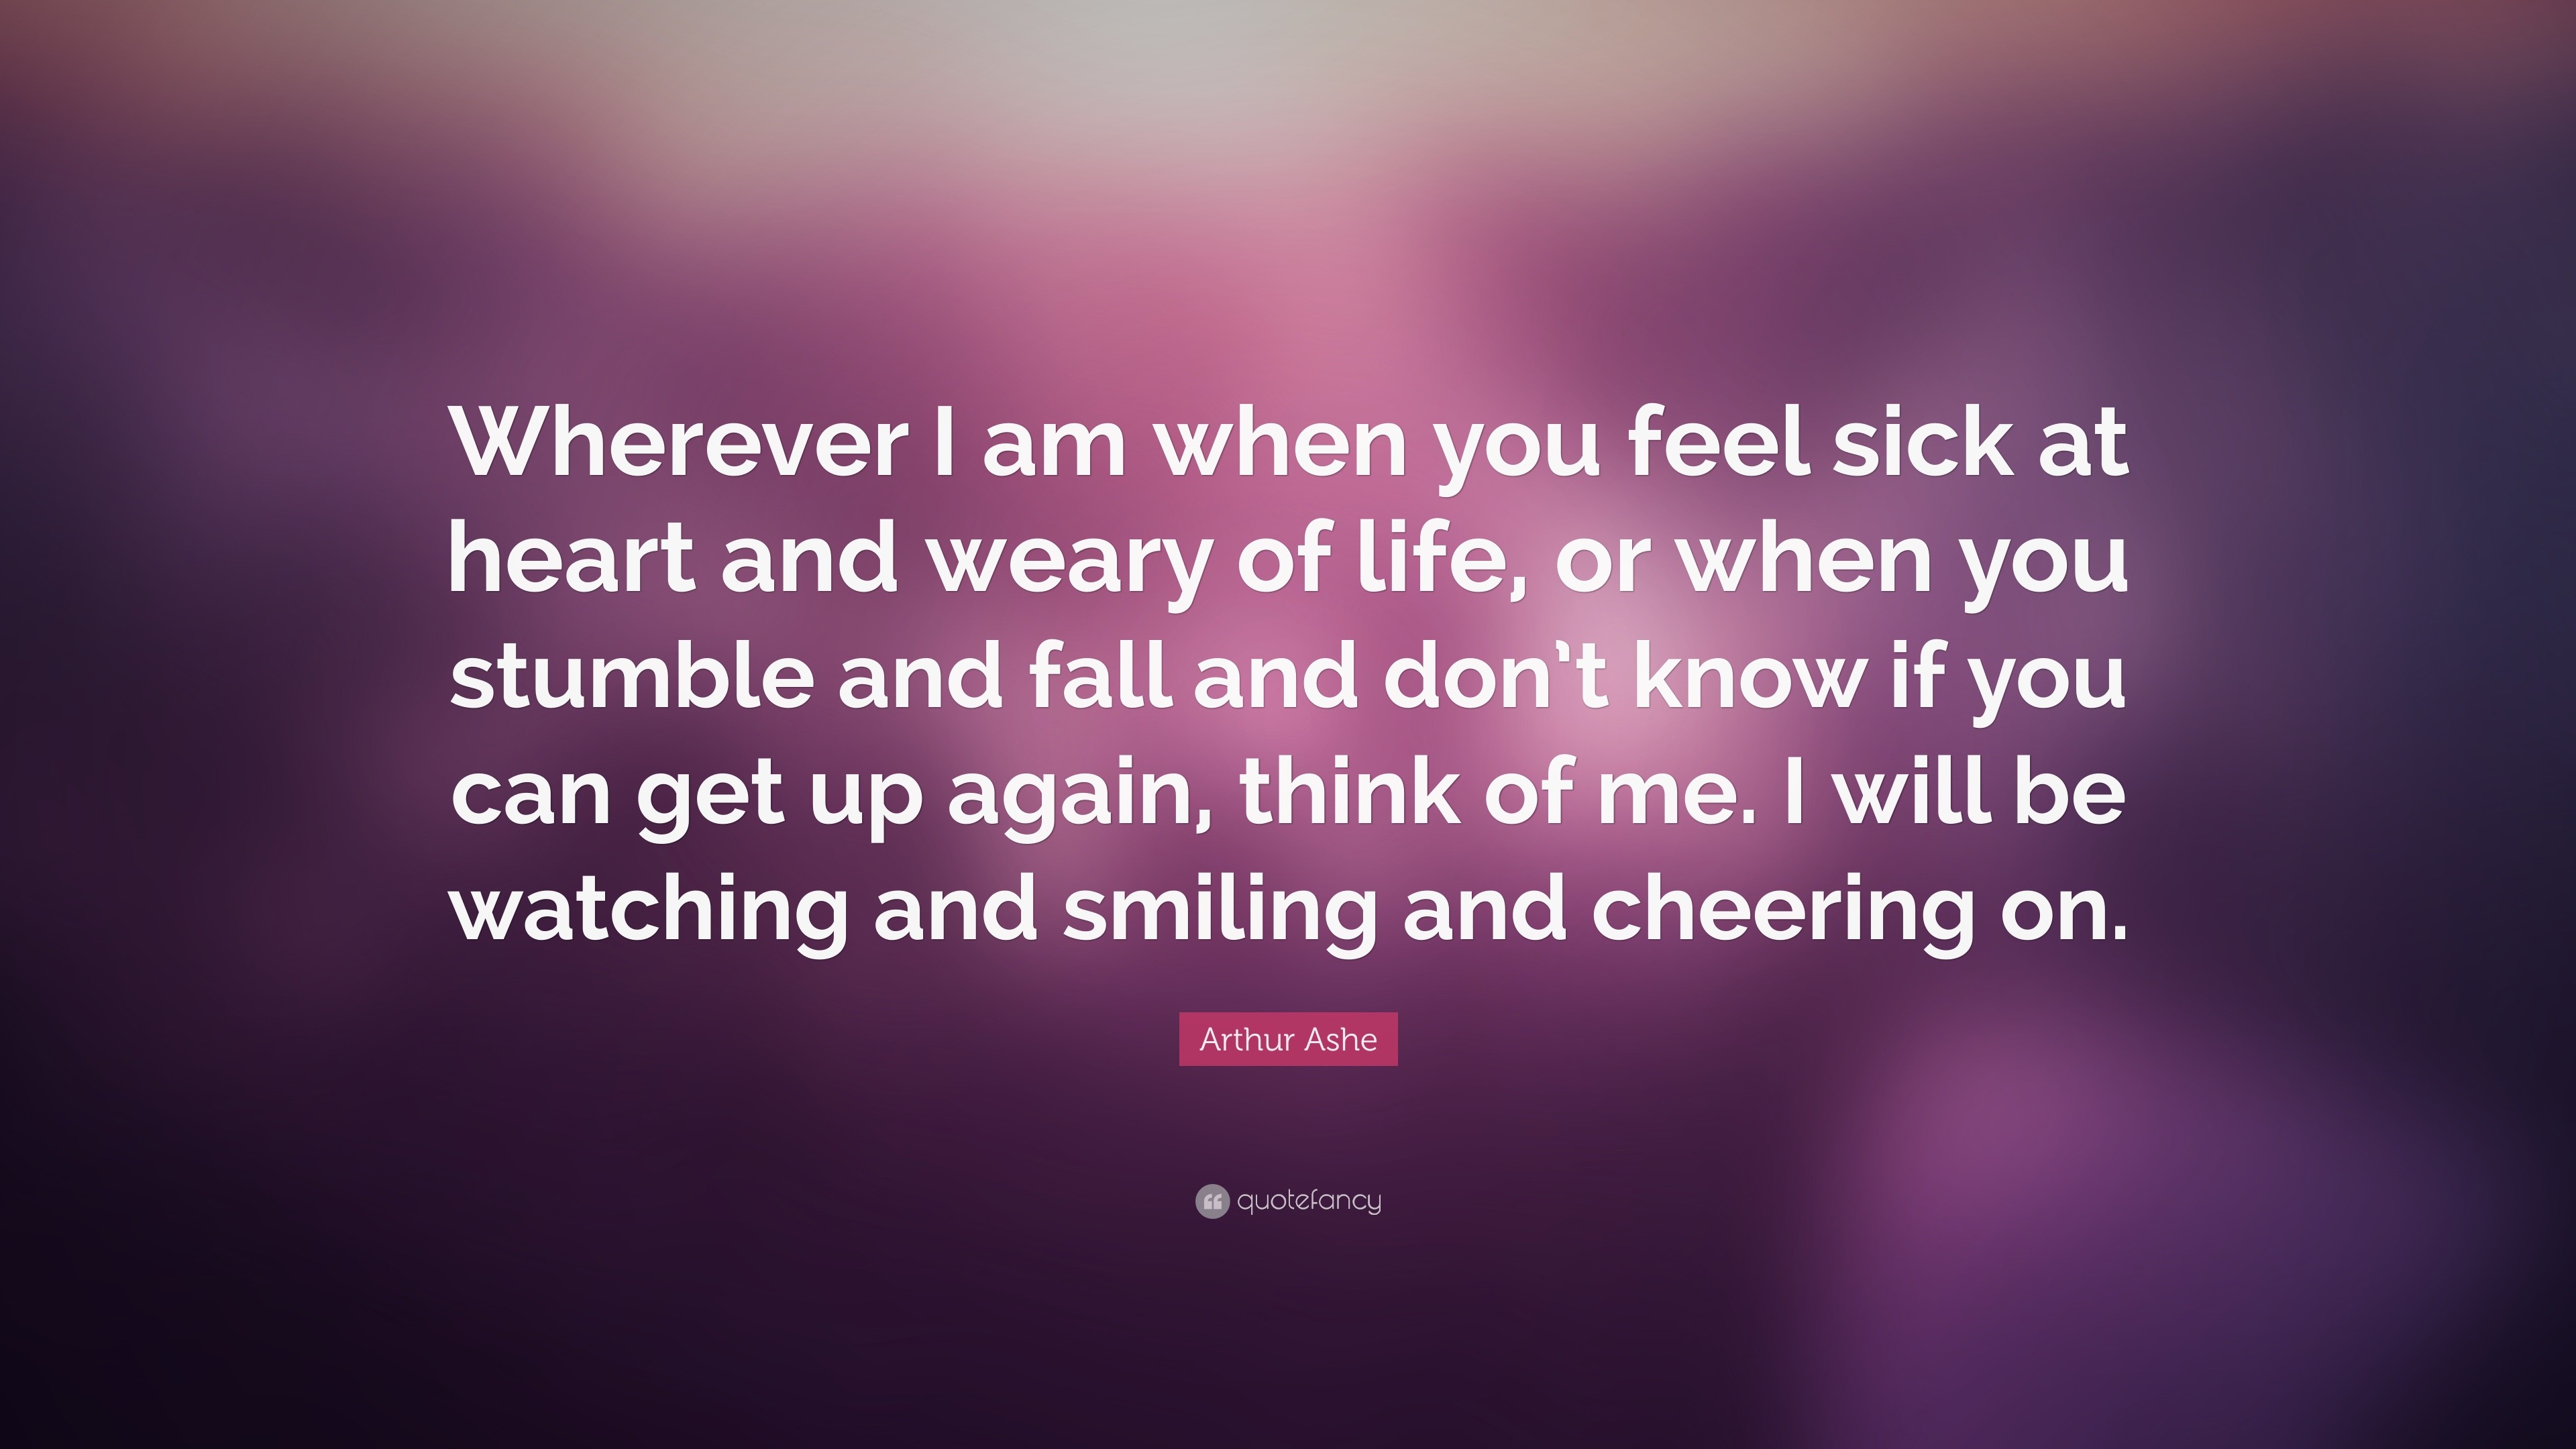 Arthur Ashe Quote: “wherever I Am When You Feel Sick At Heart And Weary 